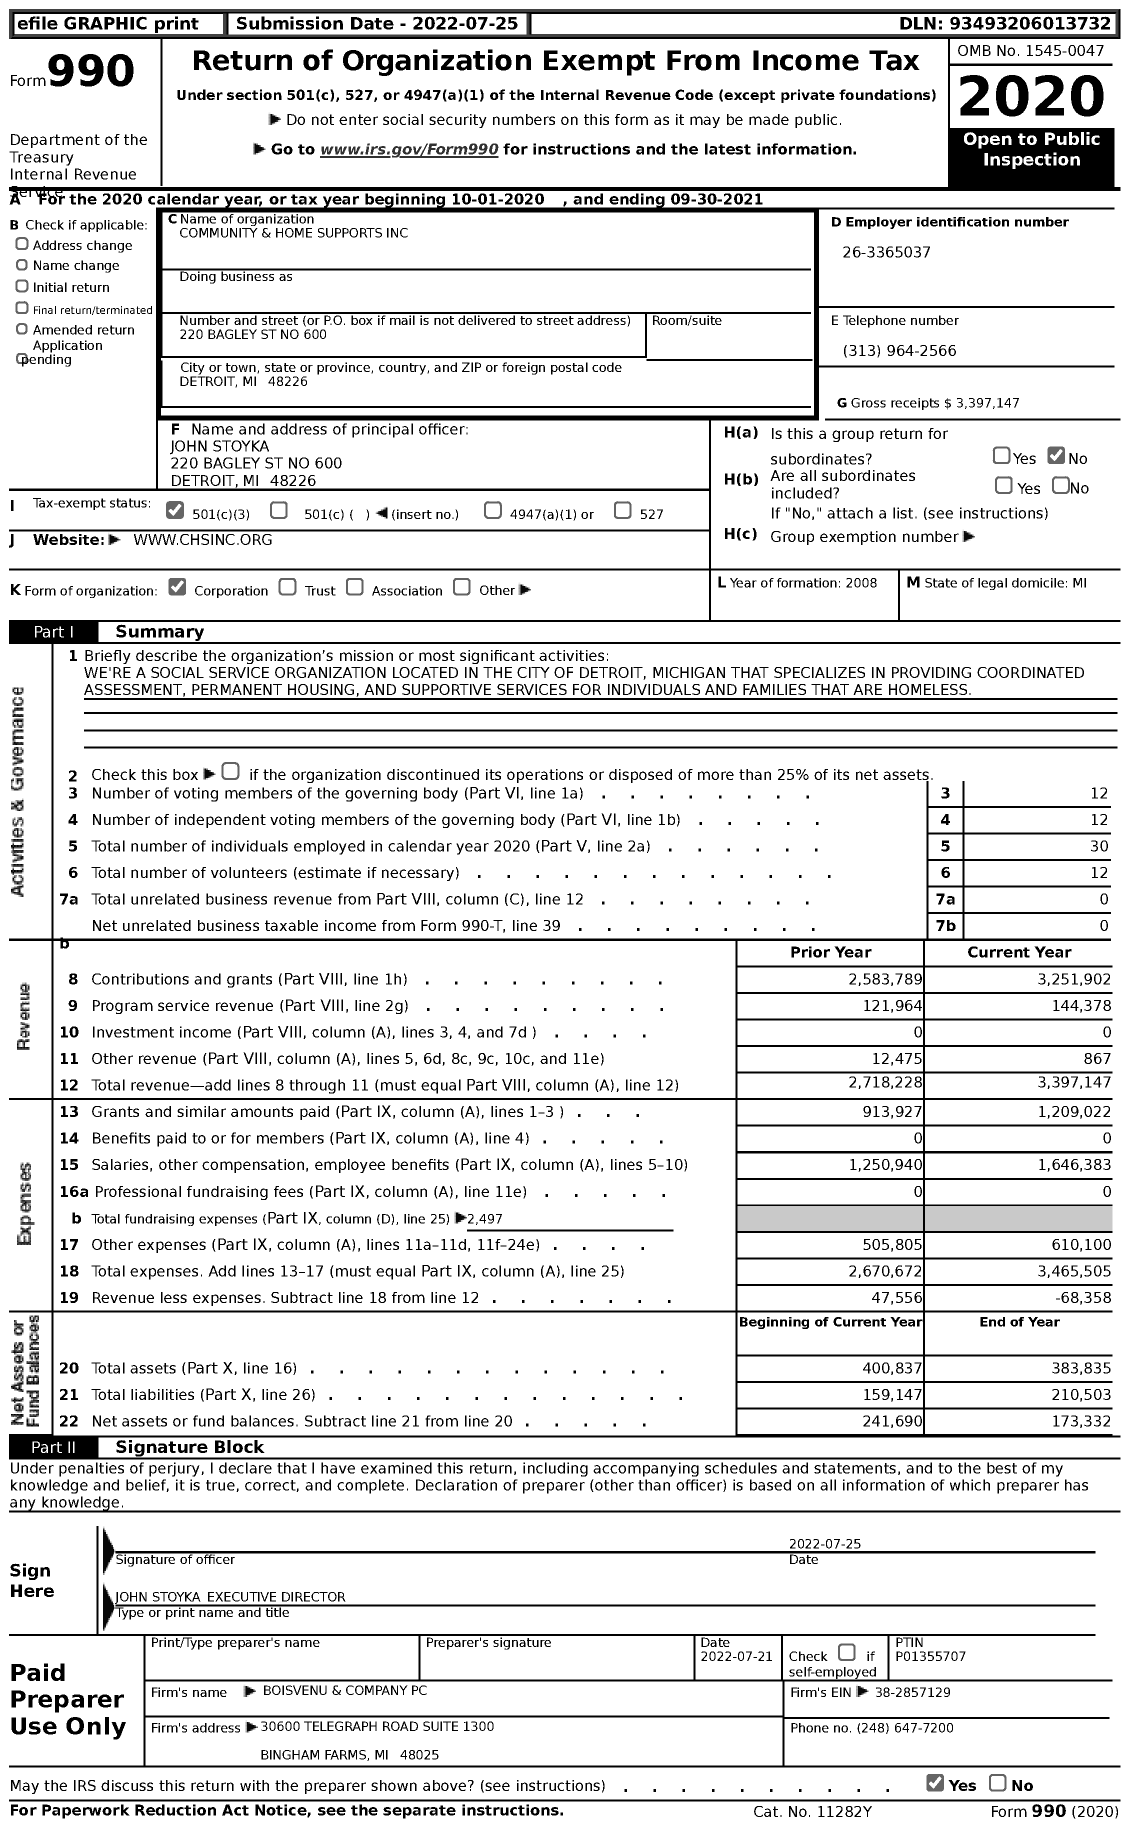 Image of first page of 2020 Form 990 for Community and Home Supports